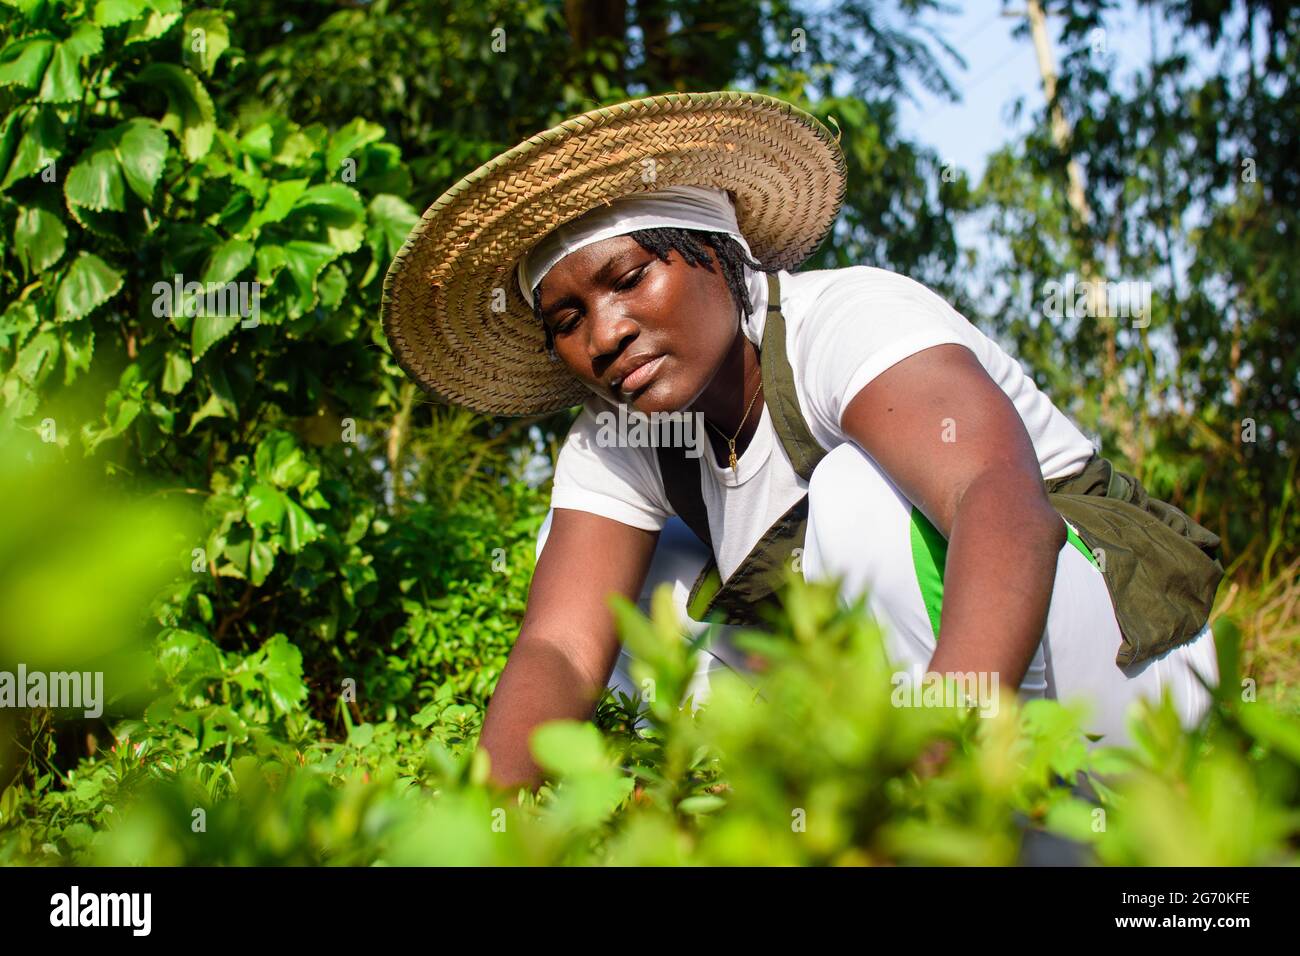 African female gardener, florist or horticulturist tending to flowers in a colorful garden Stock Photo